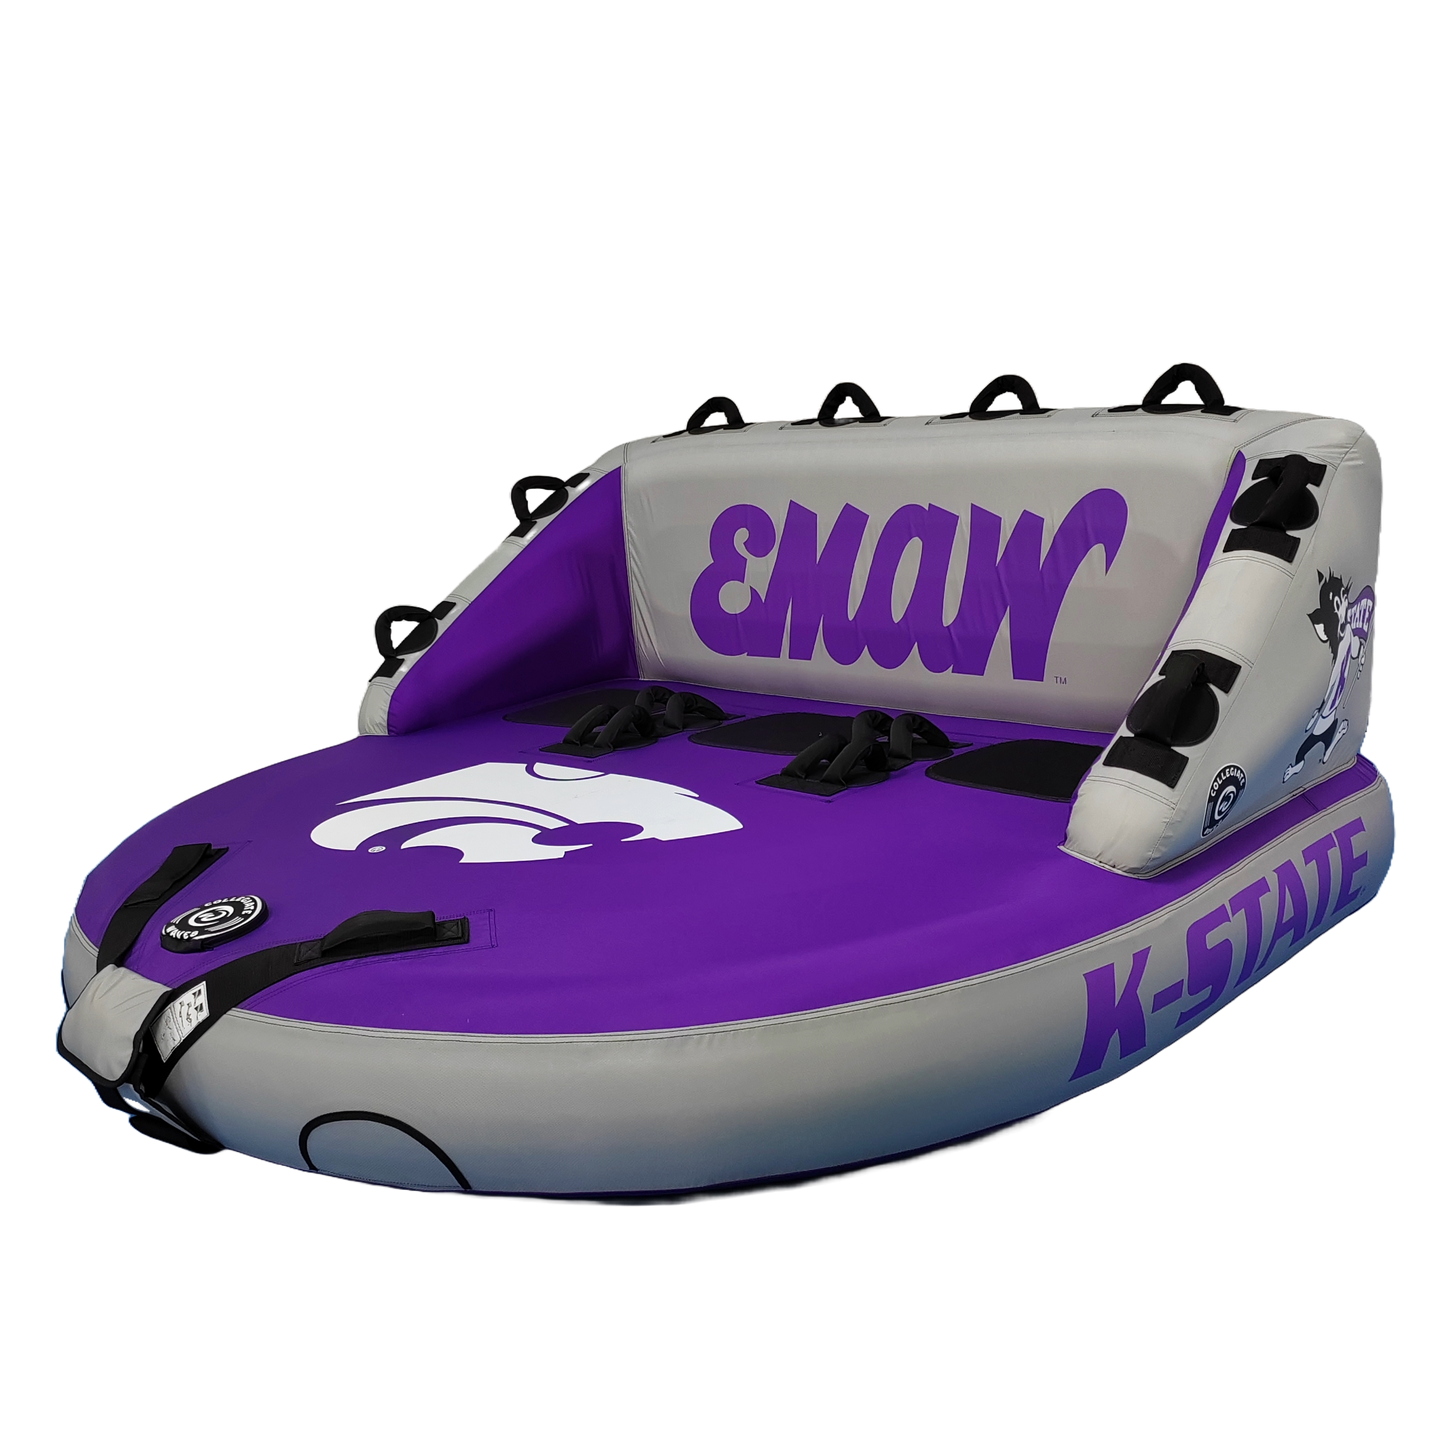 K-State "The Coach" Towable Tube